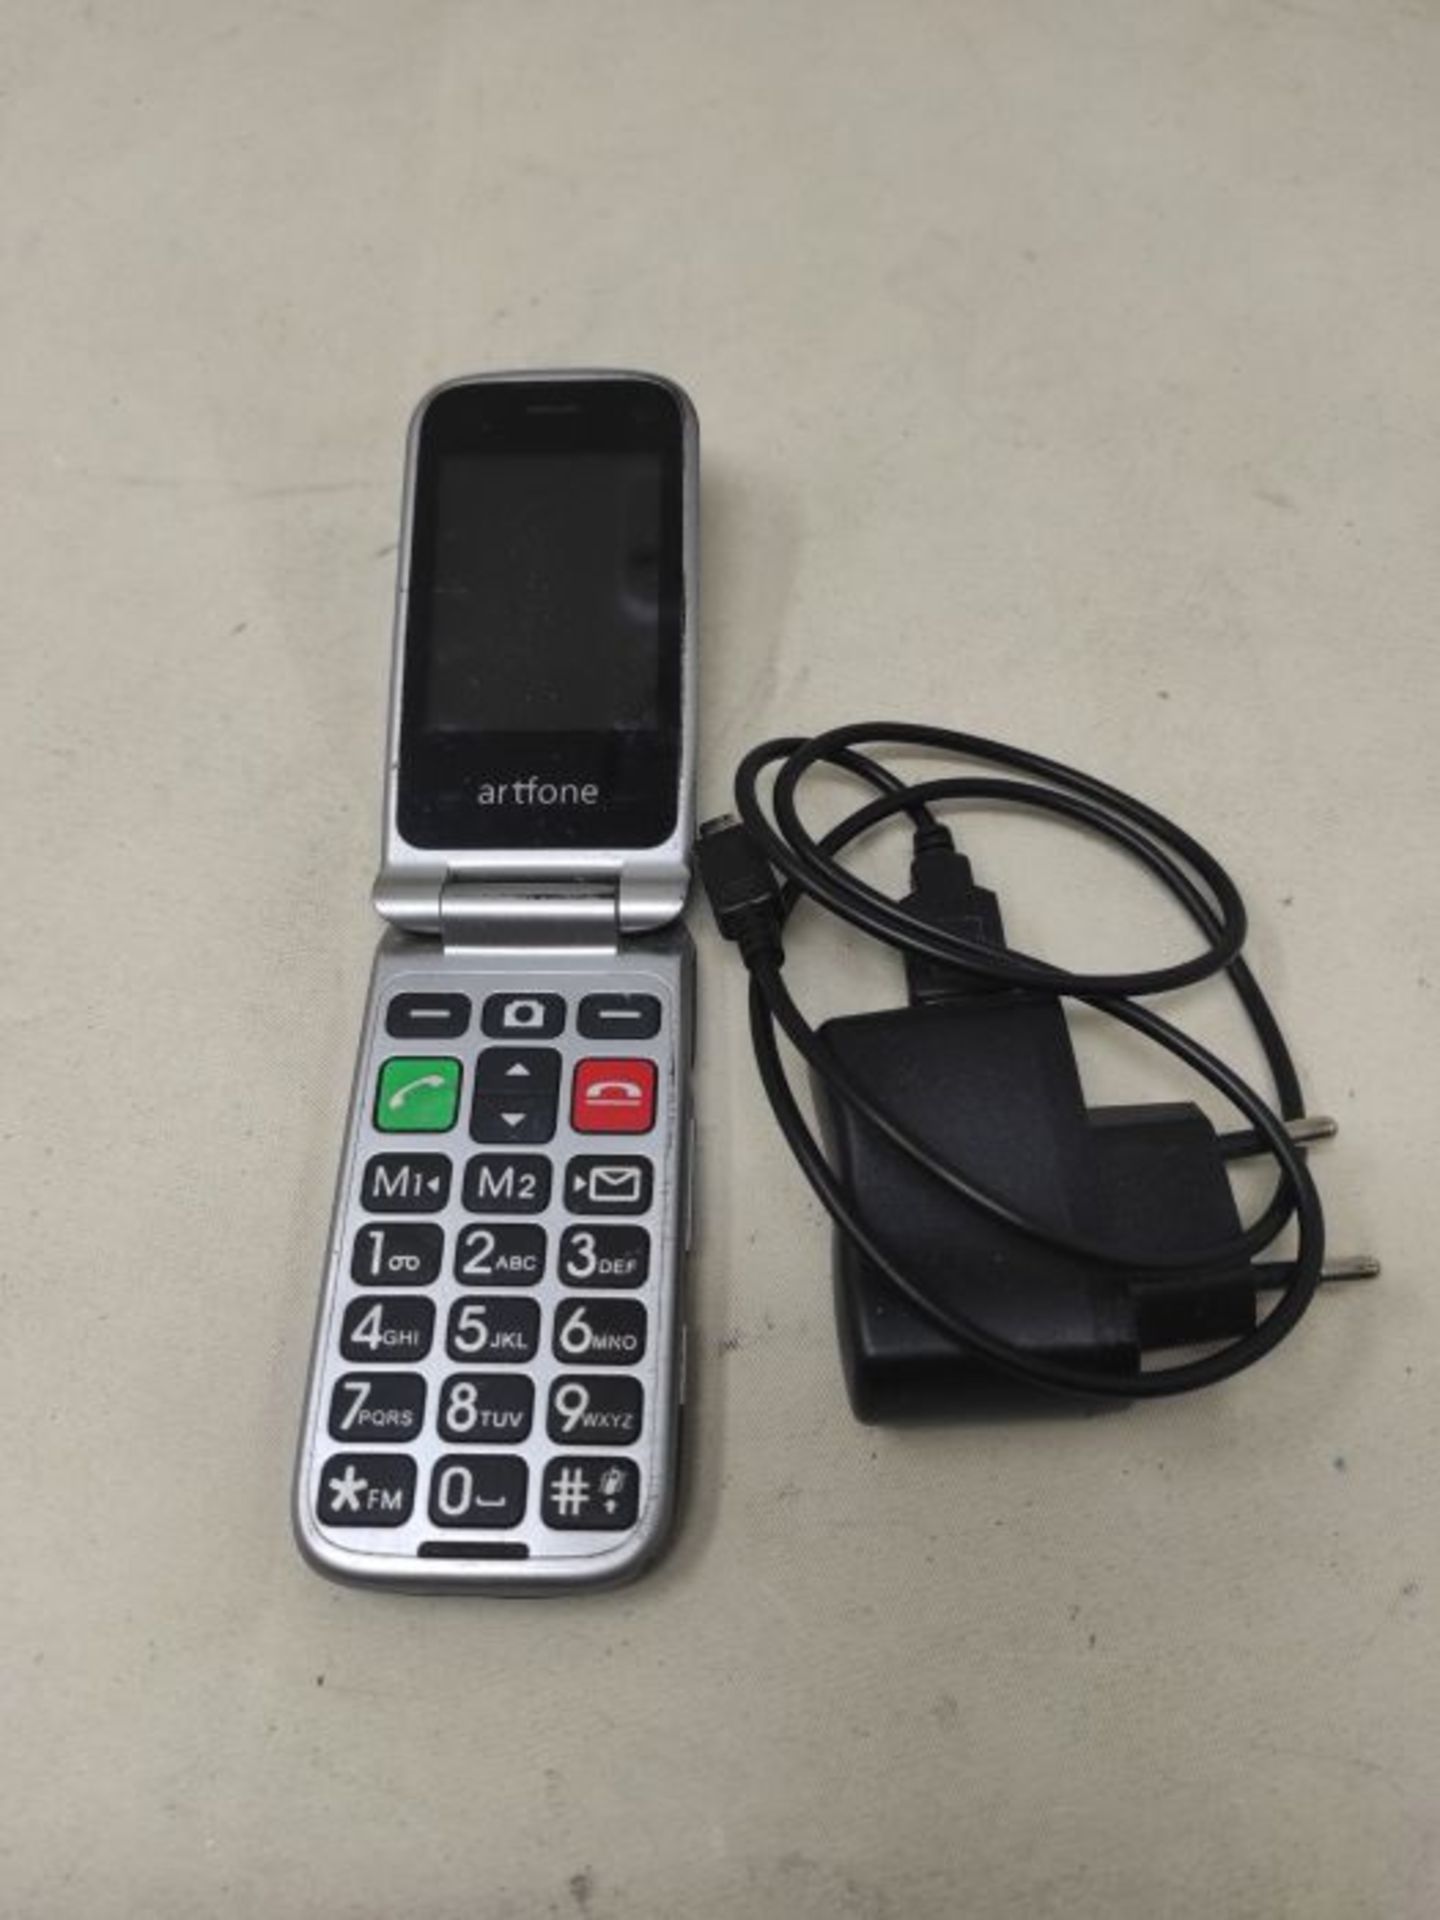 artfone Big Button Mobile Phone for Elderly, Senior Flip Mobile Phone With 2.4" LCD Di - Image 3 of 3